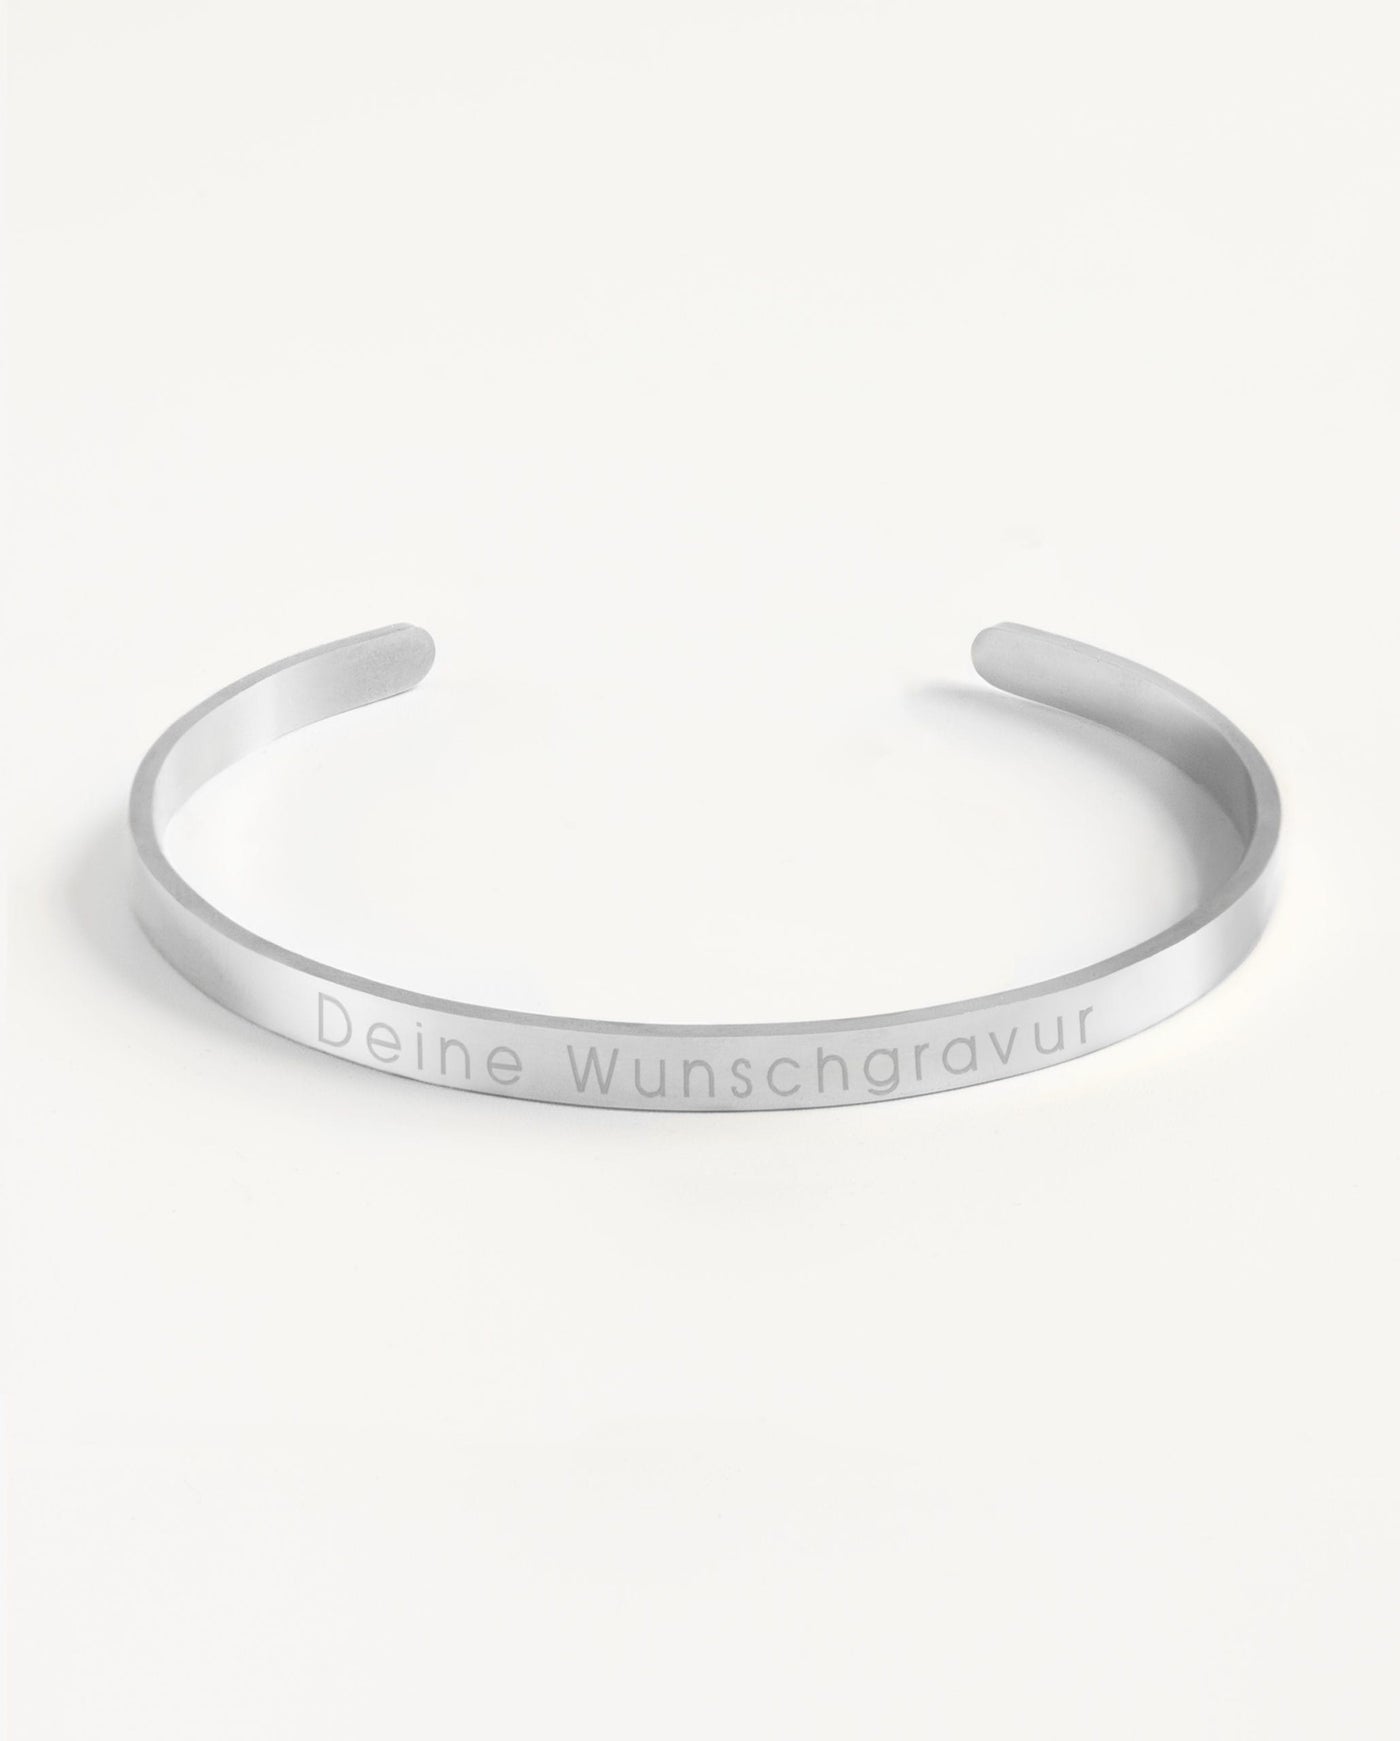 Bangle with text of your choice | individual engraving